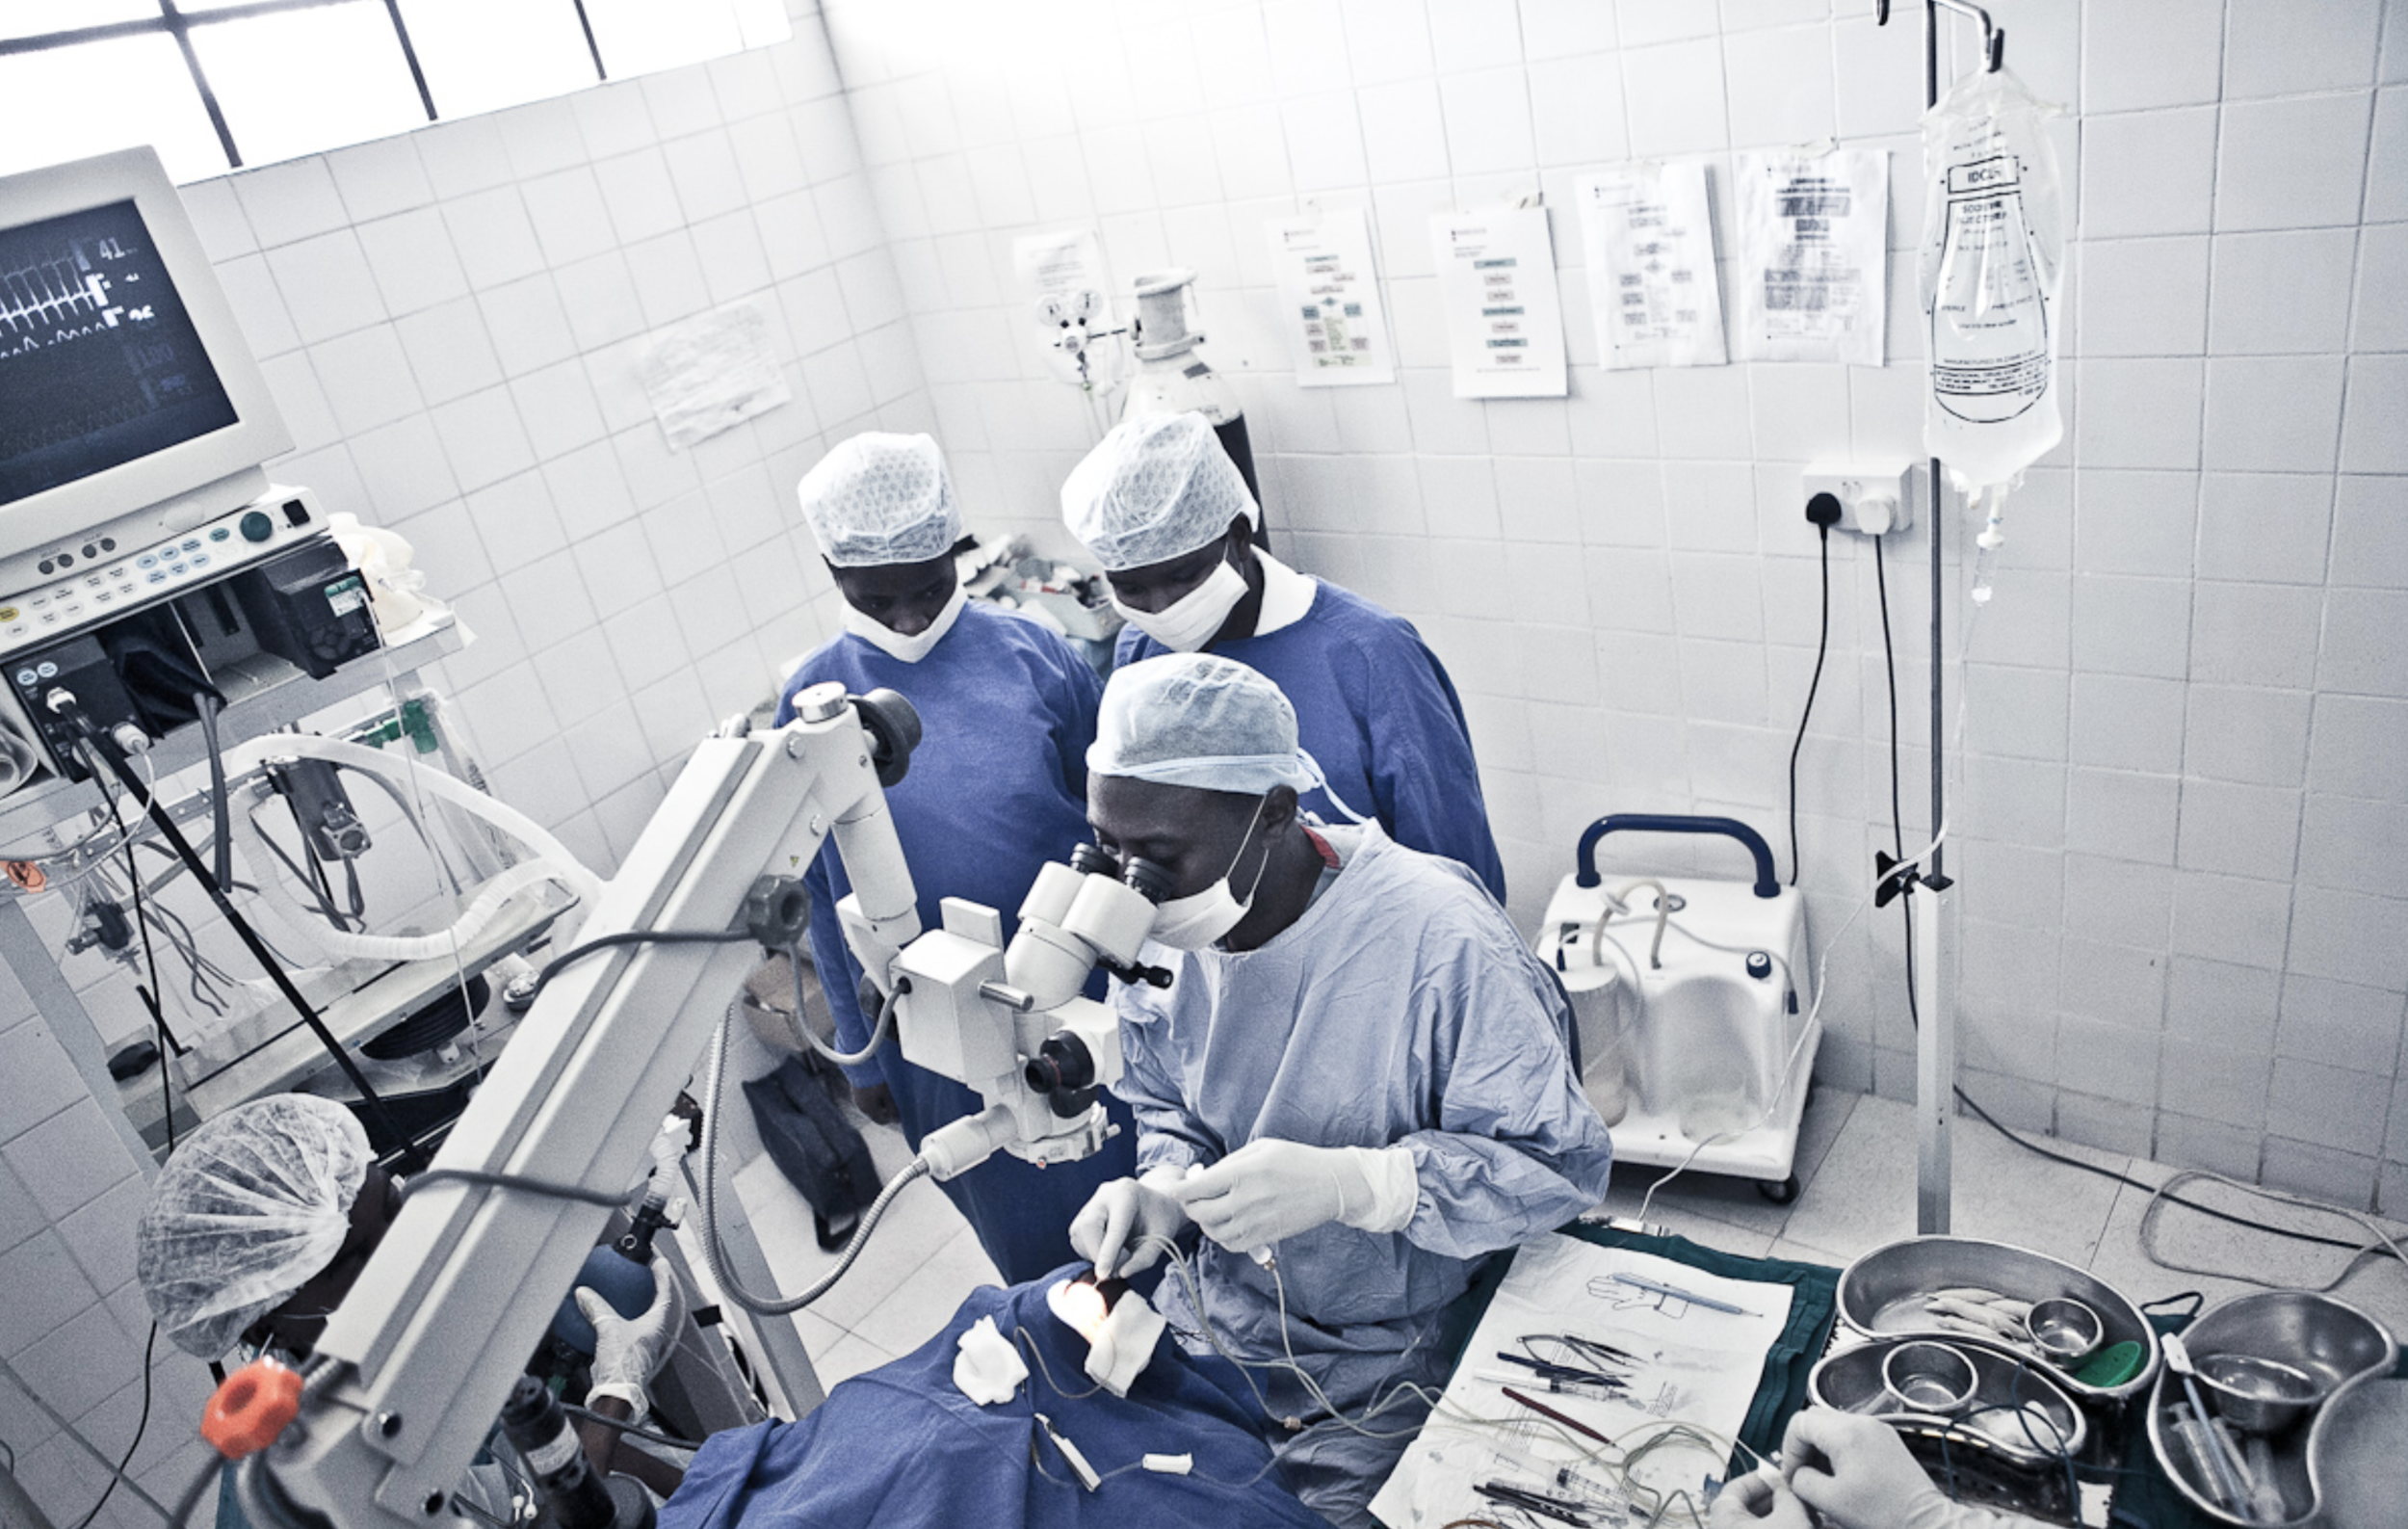  Two students attend operations to improve their skills, as future surgeons 